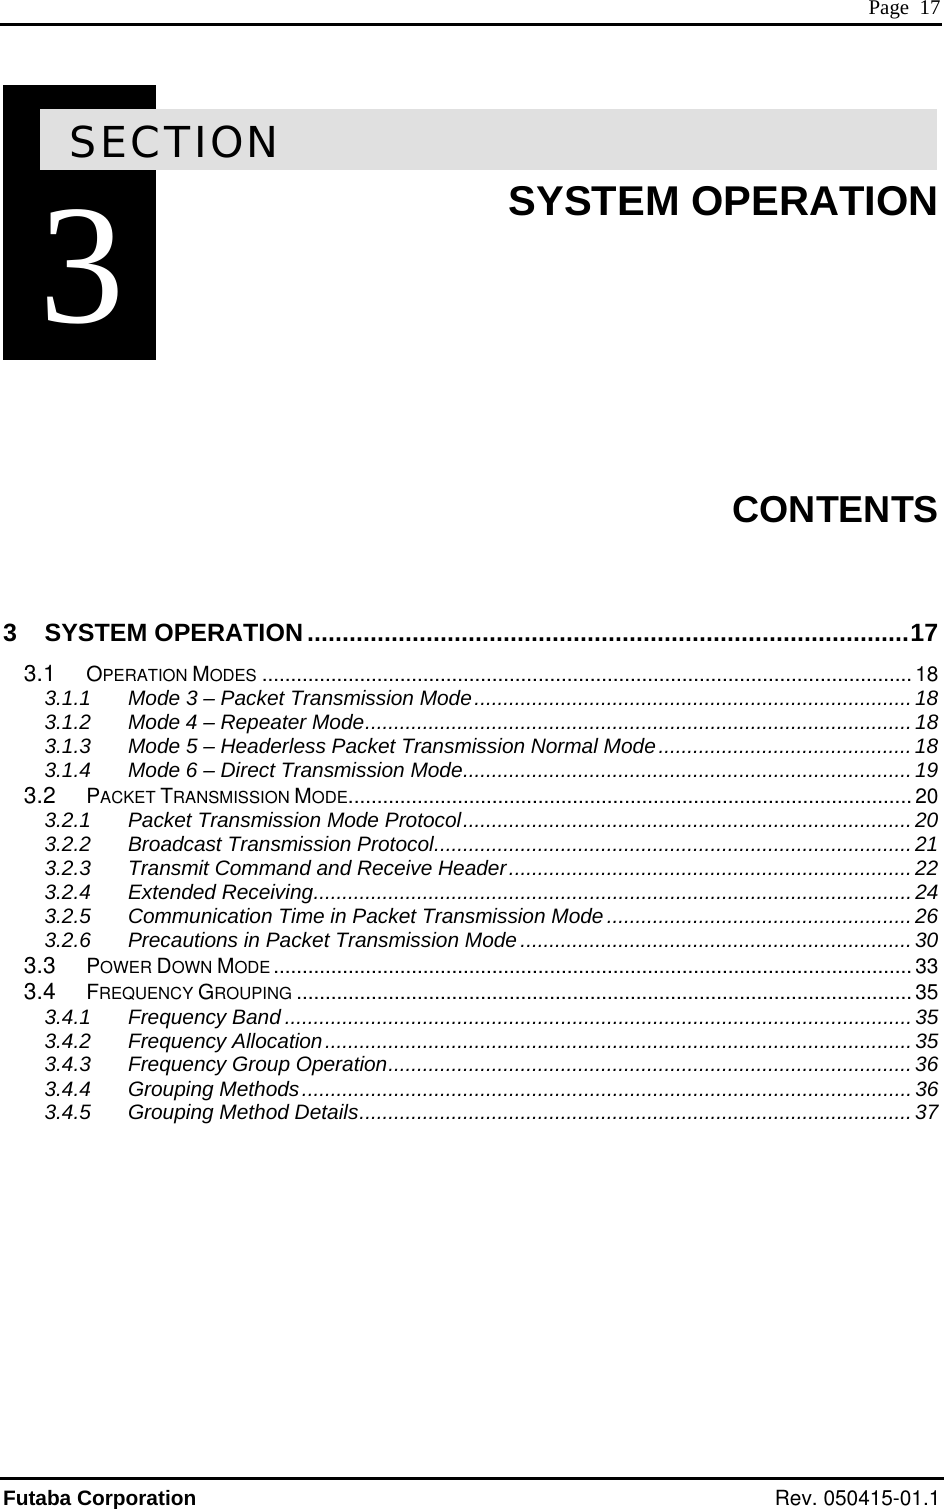  Page  17 3SECTION 3  SYSTEM OPERATION        CONTENTS  3 SYSTEM OPERATION ......................................................................................17 3.1 OPERATION MODES ................................................................................................................. 18 3.1.1 Mode 3 – Packet Transmission Mode............................................................................ 18 3.1.2 Mode 4 – Repeater Mode...............................................................................................18 3.1.3 Mode 5 – Headerless Packet Transmission Normal Mode............................................ 18 3.1.4 Mode 6 – Direct Transmission Mode..............................................................................19 3.2 PACKET TRANSMISSION MODE.................................................................................................. 20 3.2.1 Packet Transmission Mode Protocol..............................................................................20 3.2.2 Broadcast Transmission Protocol...................................................................................21 3.2.3 Transmit Command and Receive Header......................................................................22 3.2.4 Extended Receiving........................................................................................................24 3.2.5 Communication Time in Packet Transmission Mode..................................................... 26 3.2.6 Precautions in Packet Transmission Mode.................................................................... 30 3.3 POWER DOWN MODE ............................................................................................................... 33 3.4 FREQUENCY GROUPING ........................................................................................................... 35 3.4.1 Frequency Band ............................................................................................................. 35 3.4.2 Frequency Allocation......................................................................................................35 3.4.3 Frequency Group Operation...........................................................................................36 3.4.4 Grouping Methods..........................................................................................................36 3.4.5 Grouping Method Details................................................................................................ 37   Futaba Corporation Rev. 050415-01.1 